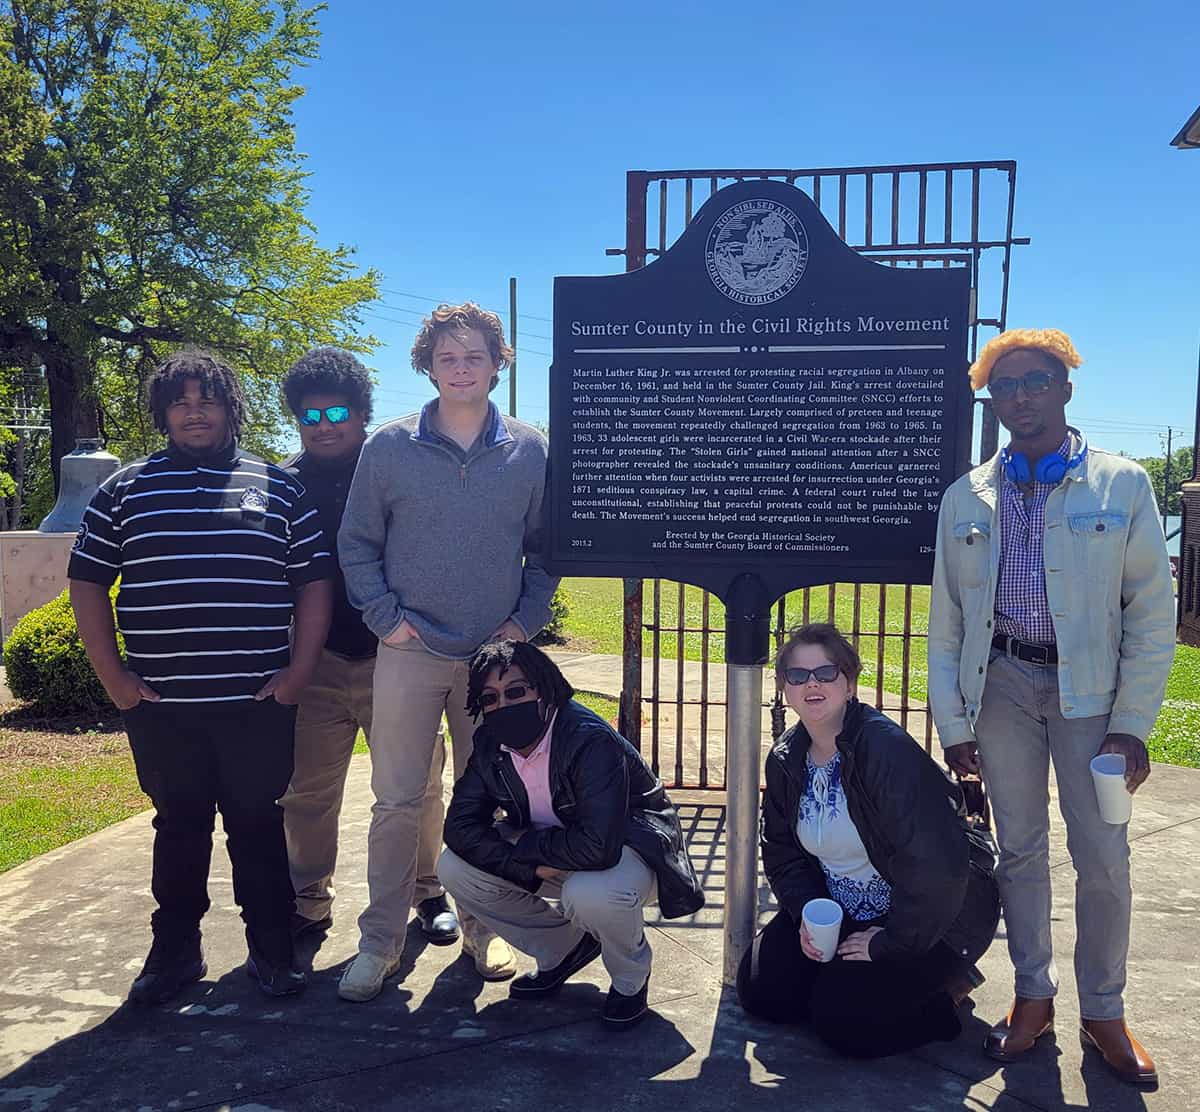 SGTC Criminal Justice Corrections Class students Jadeer Thompson, Damir Mincey, Jacob Abell, Jadon Bailey, Erin White and Ladeaveon Lockette are shown above in front of the Sumter County Courthouse sign.